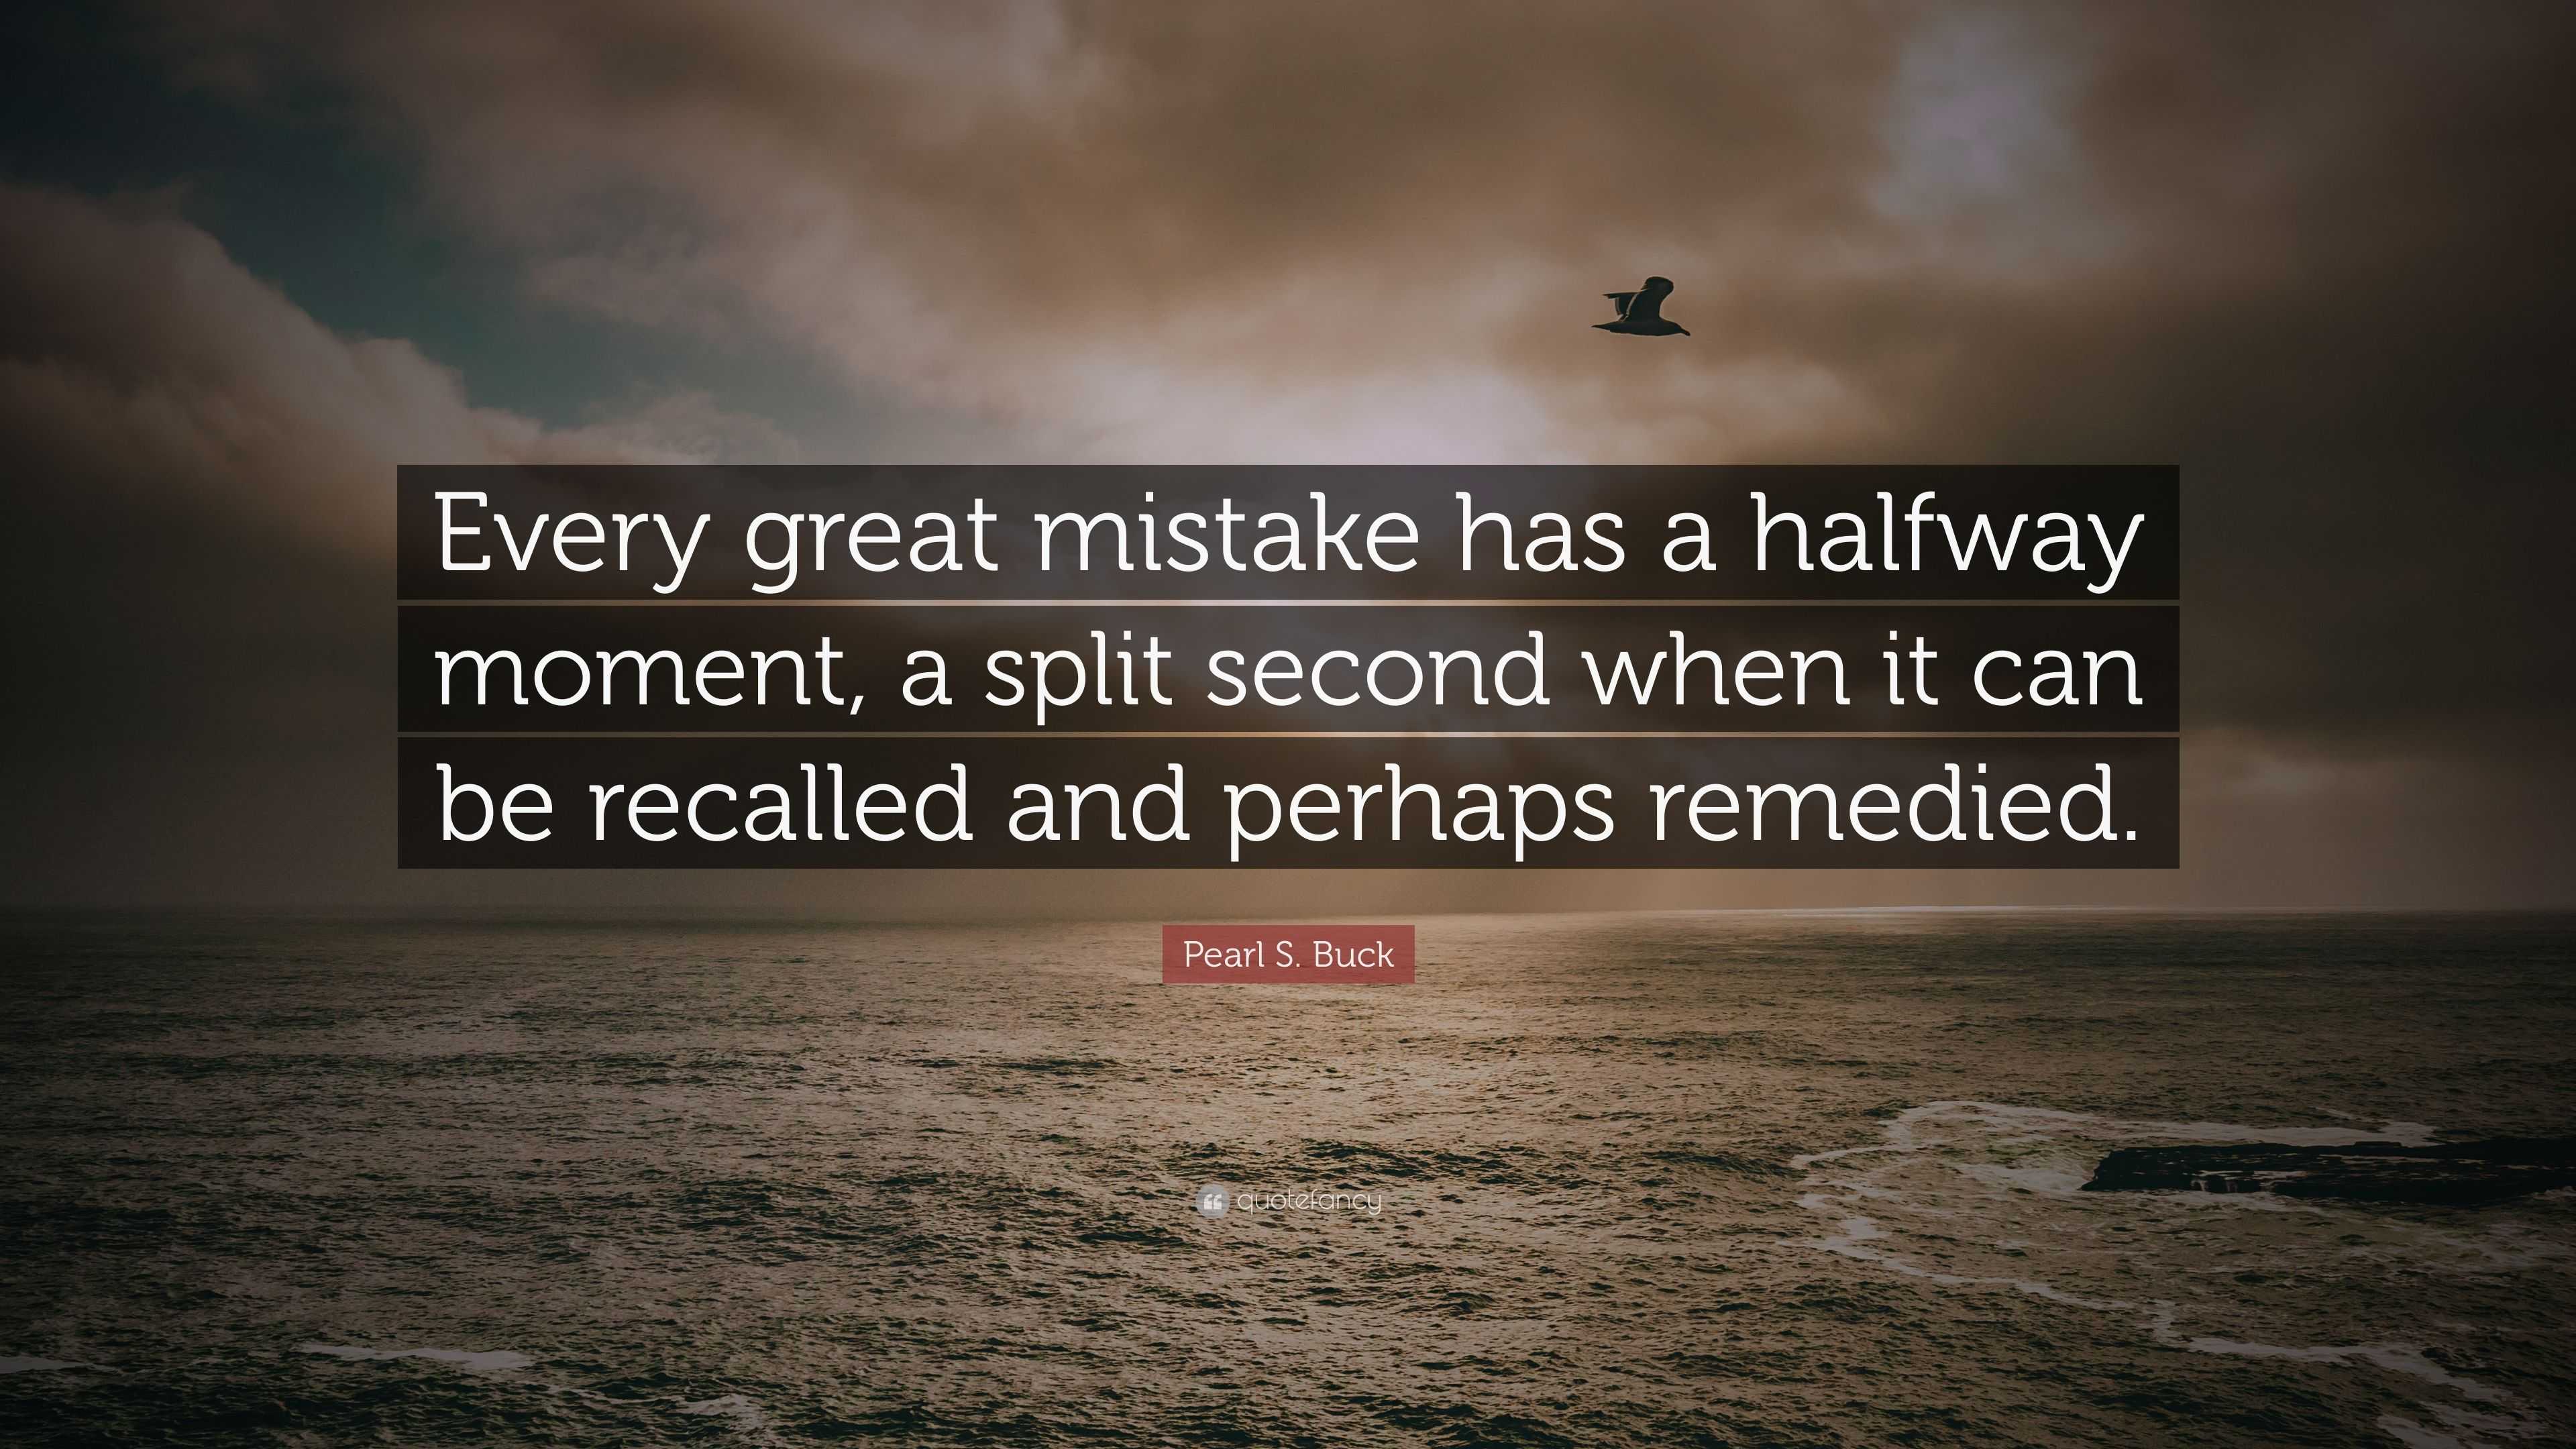 Pearl S. Buck Quote: “Every great mistake has a halfway moment, a split ...